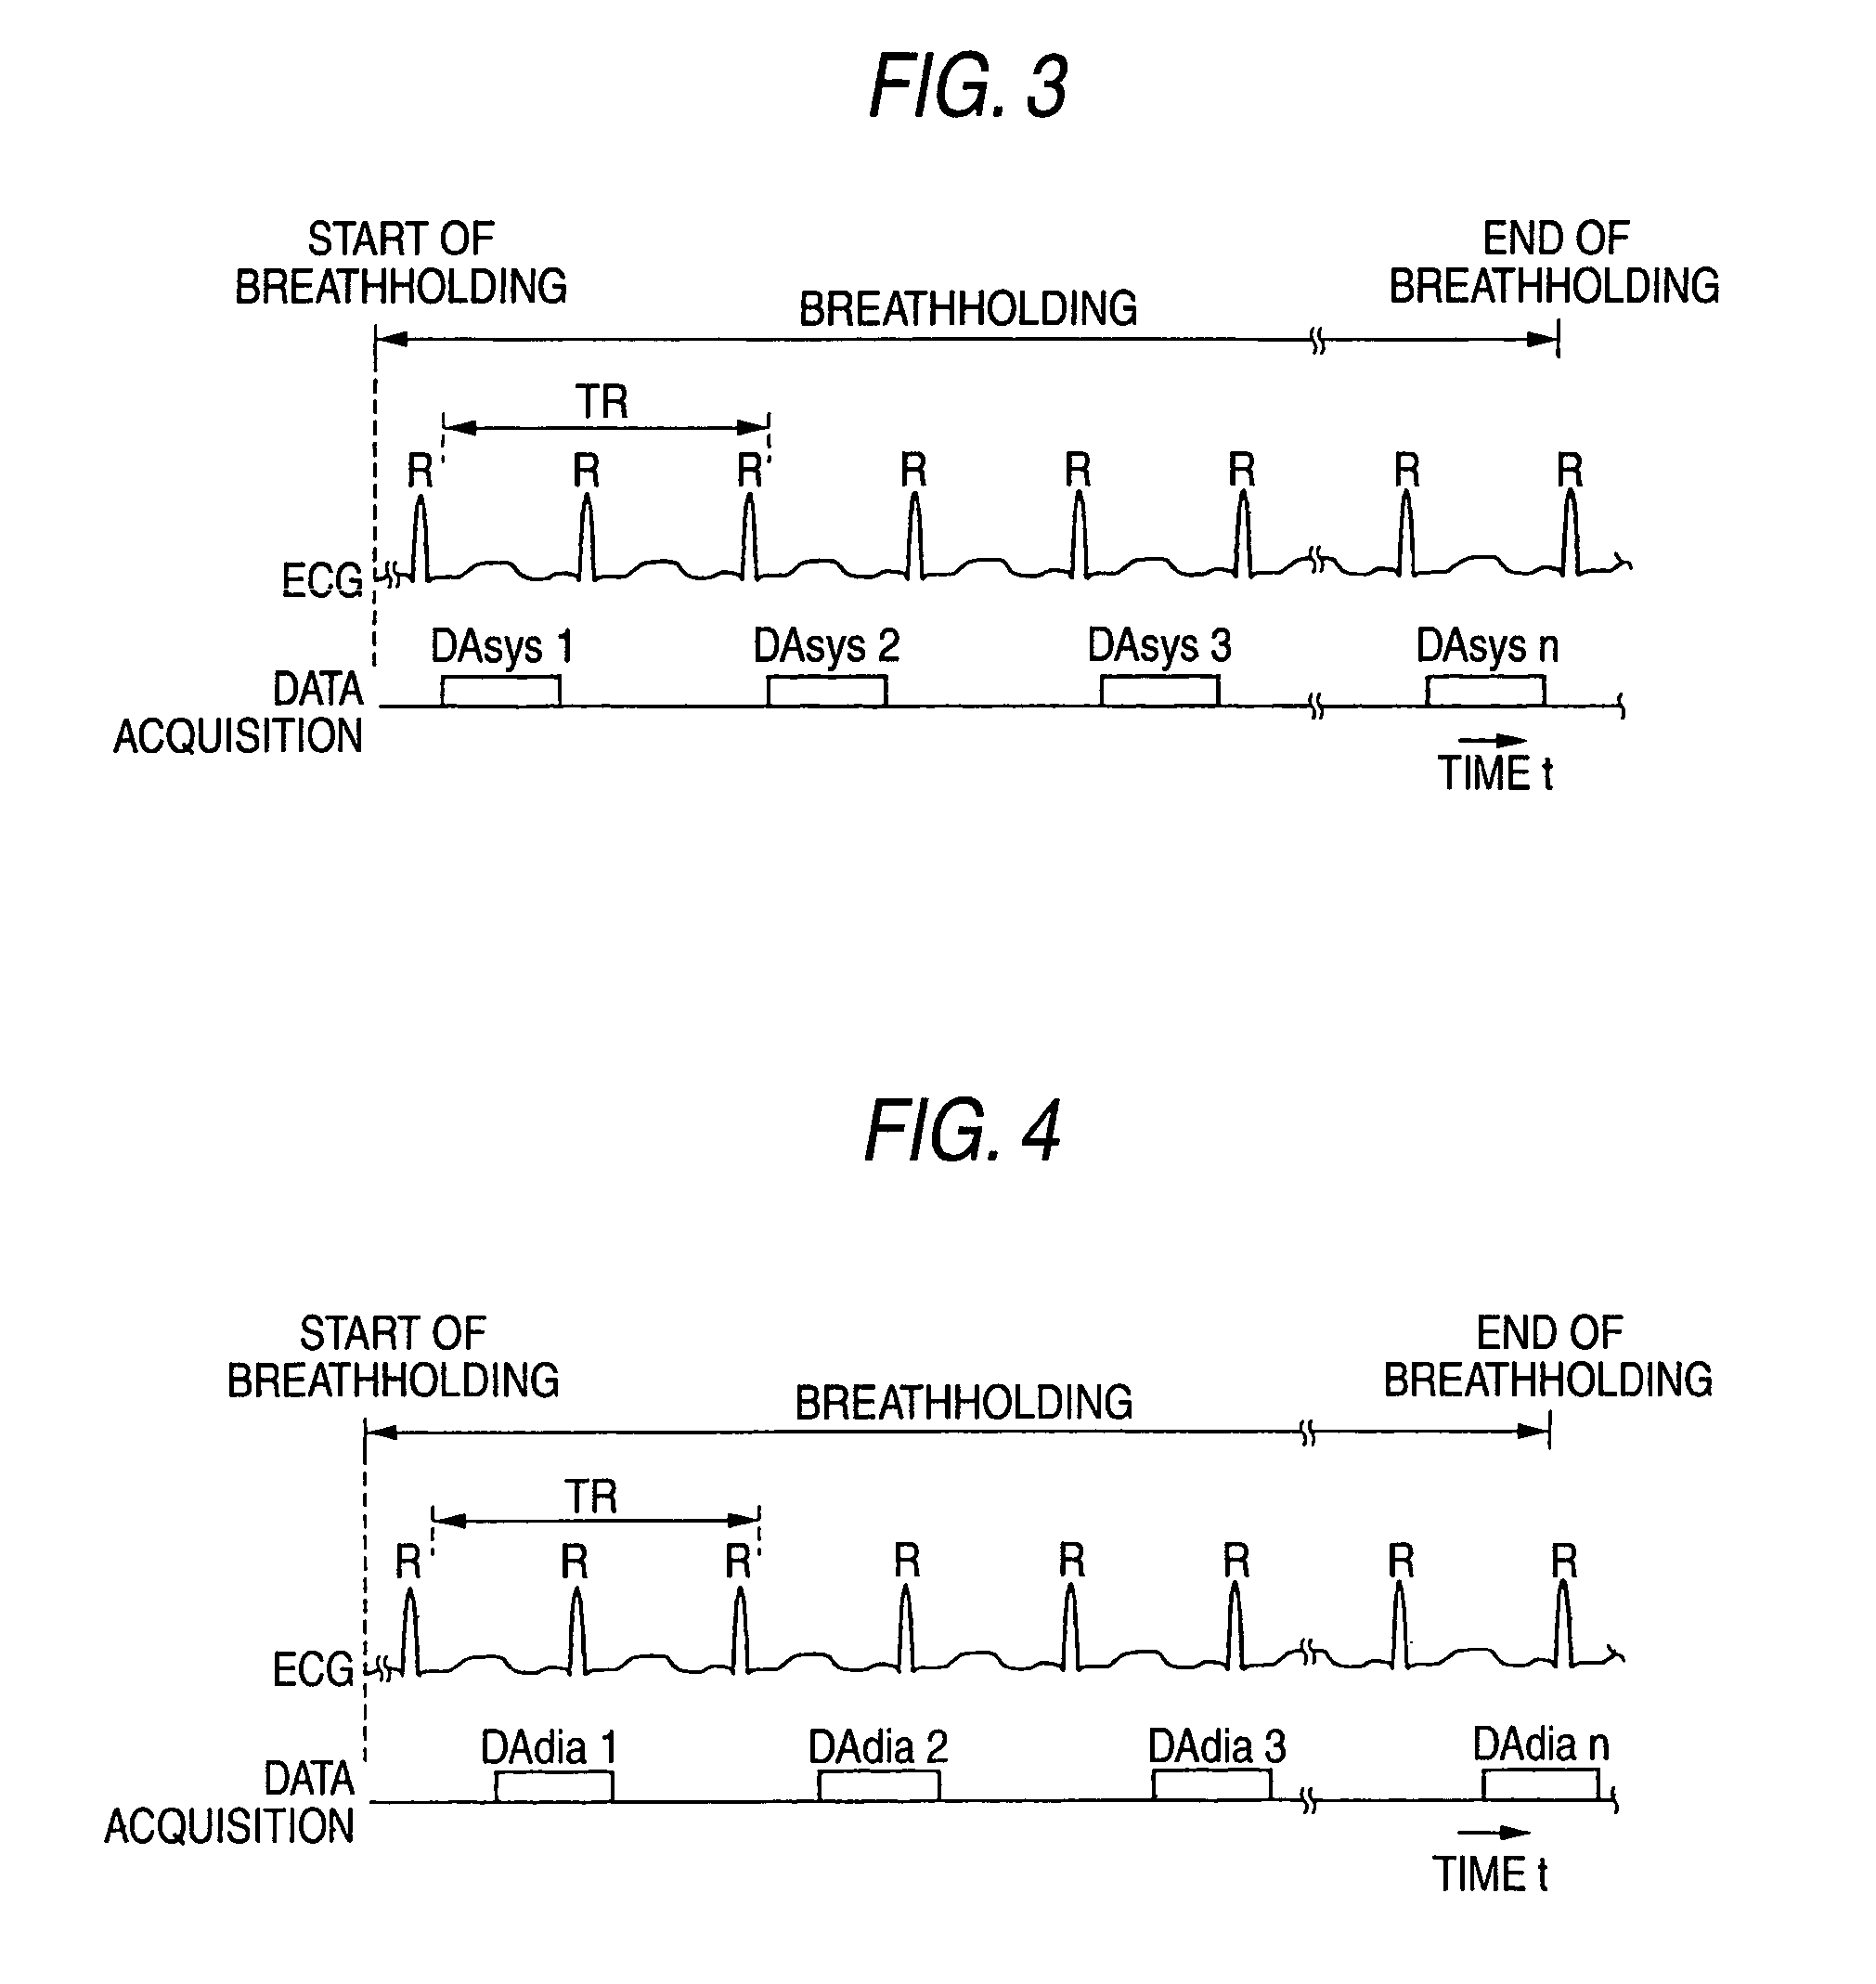 Apparatus and method for magnetic resonance angiography utilizing flow pulses and phase-encoding pulses in a same direction